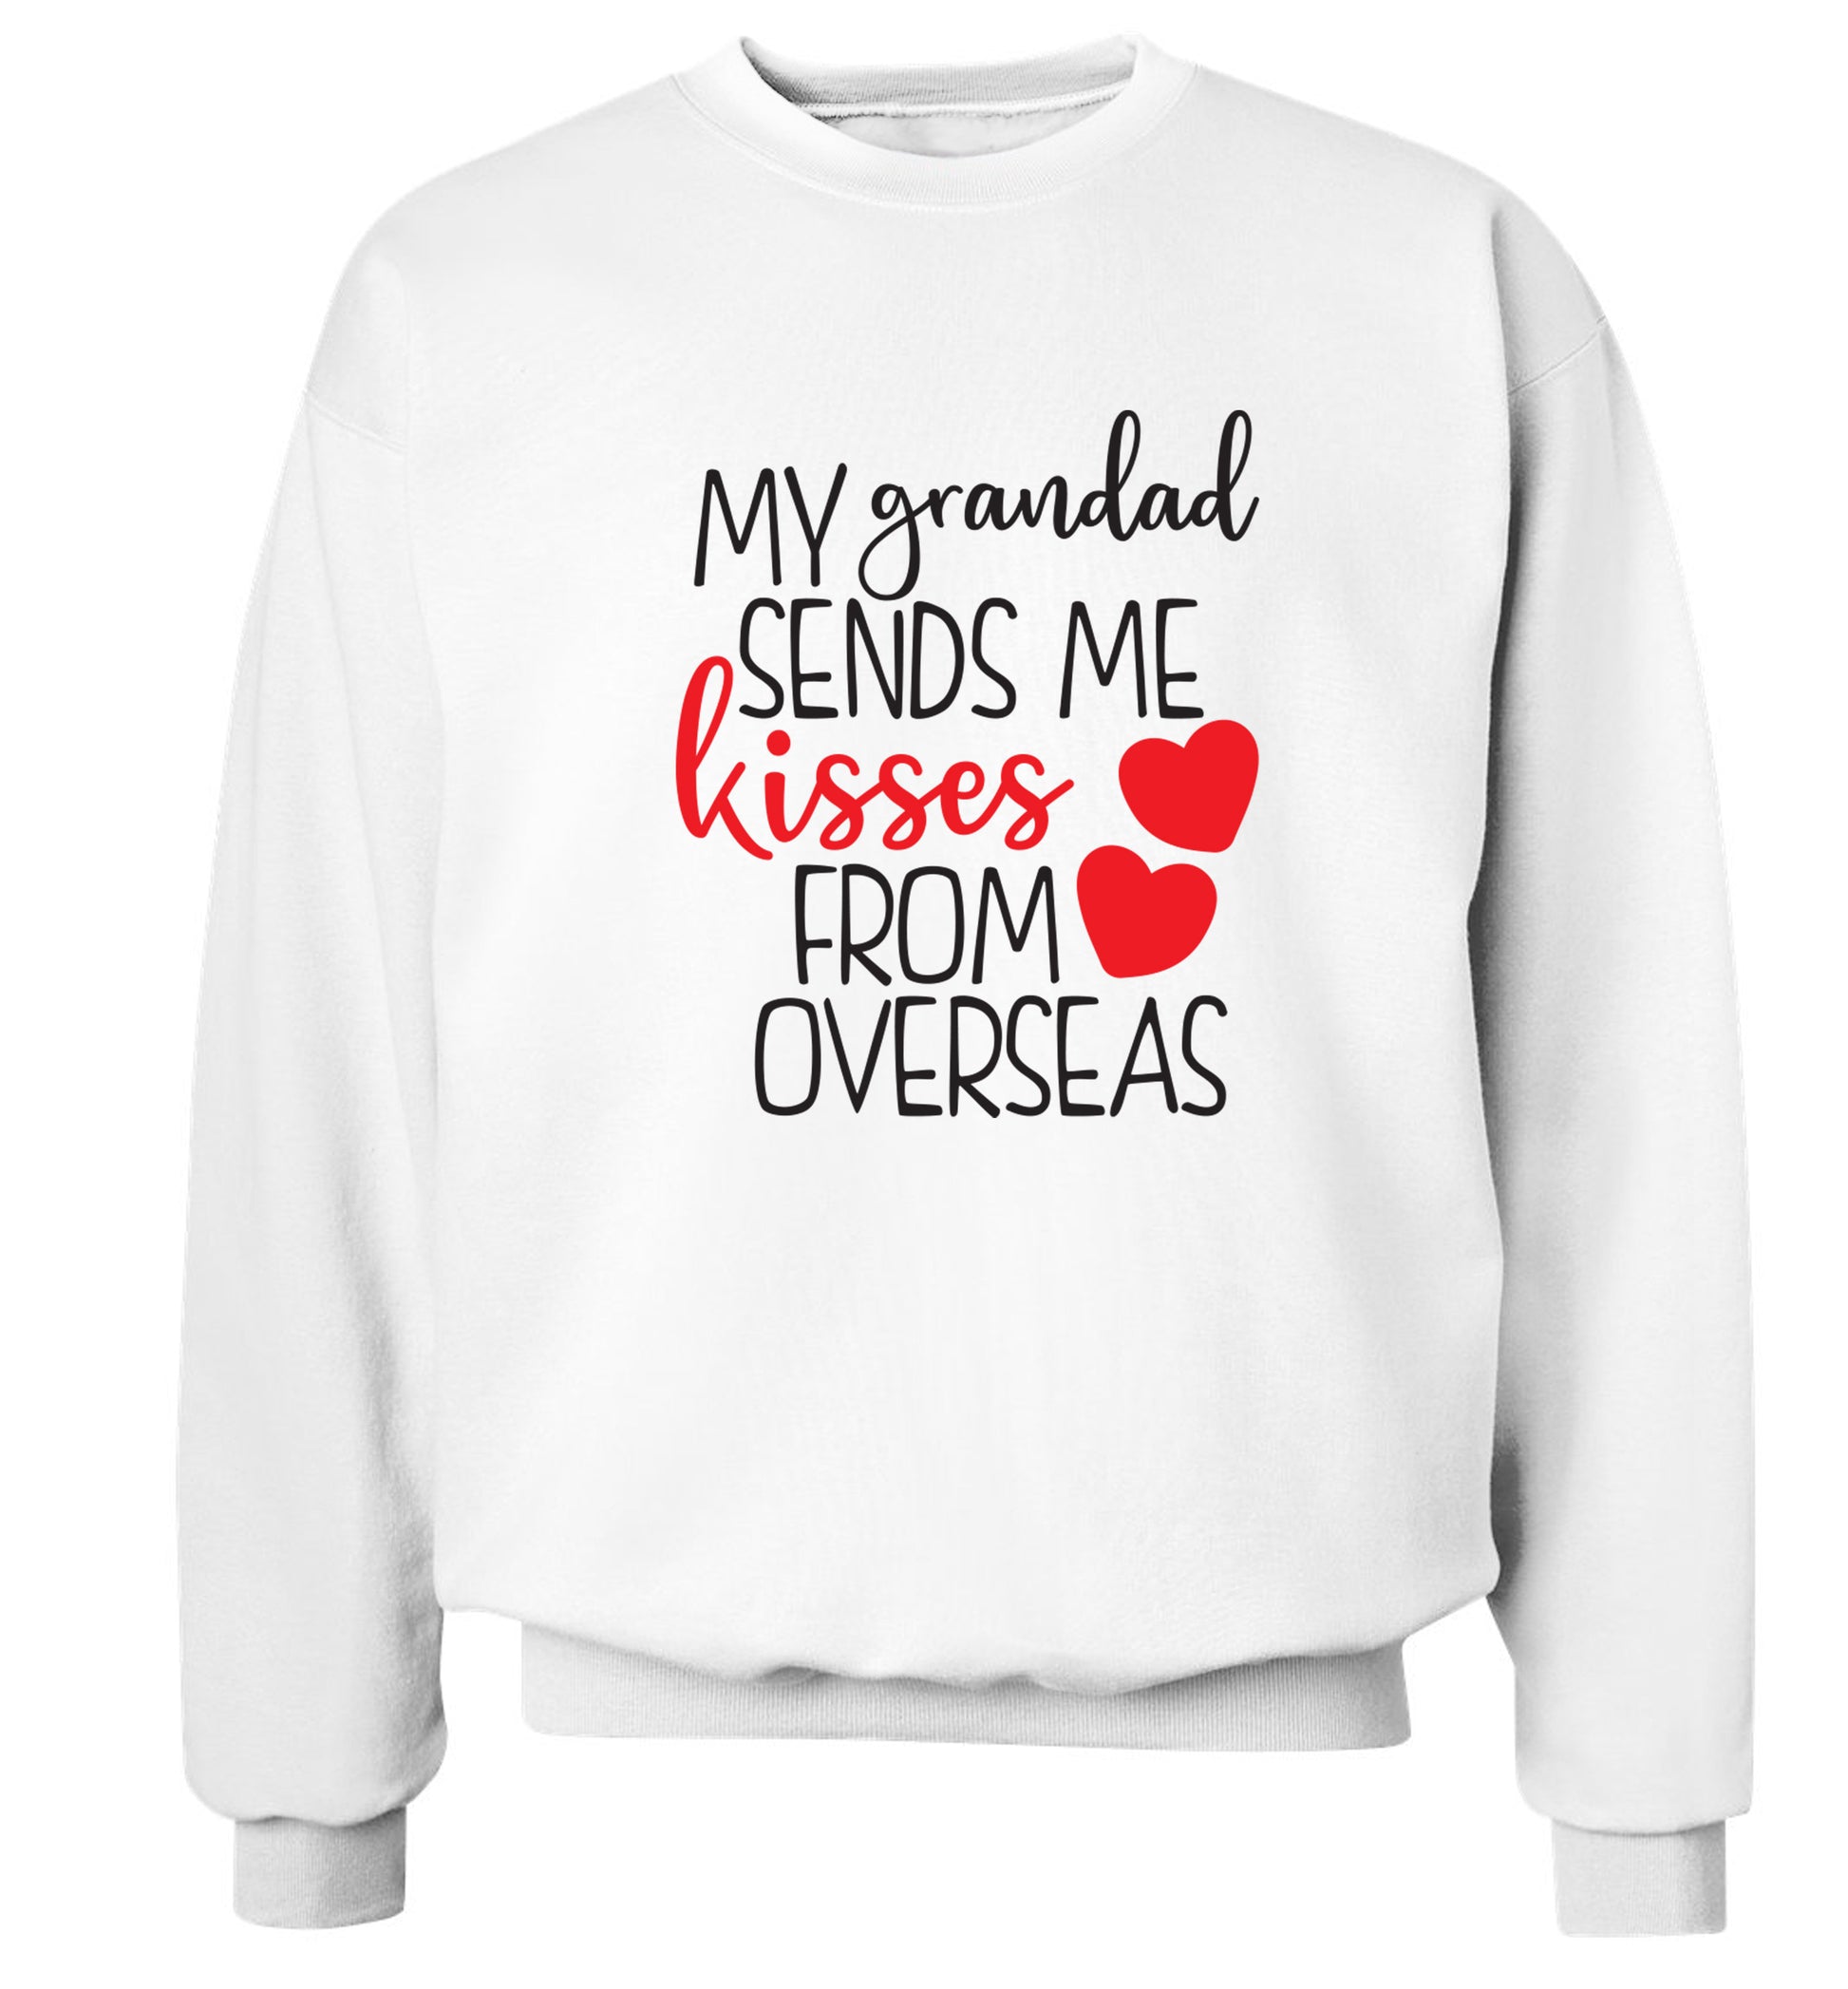 My Grandad sends me kisses from overseas Adult's unisex white Sweater 2XL